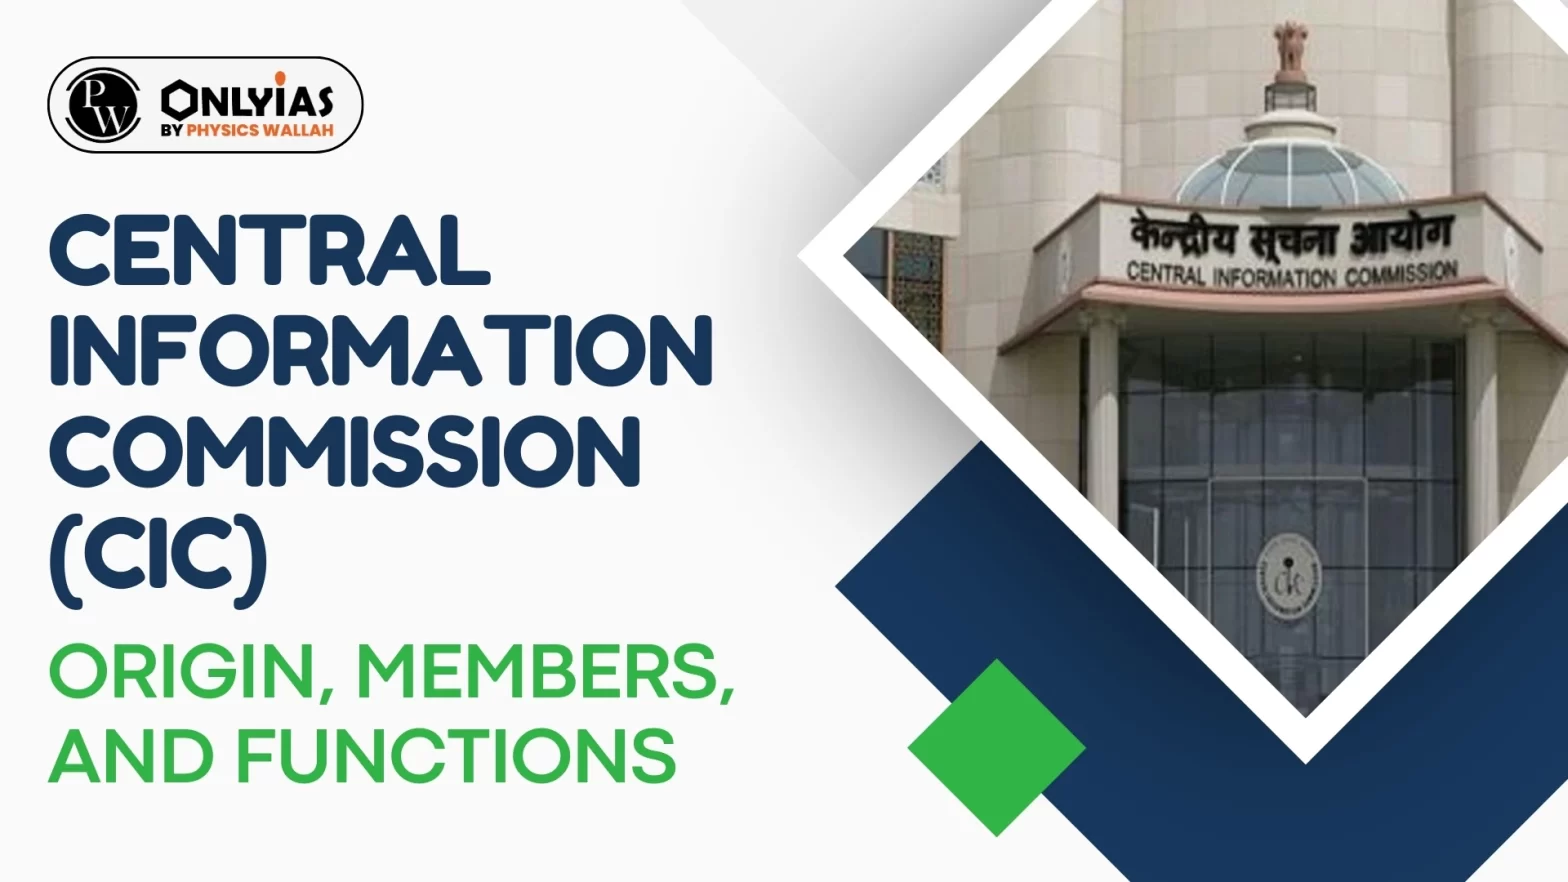 Central Information Commission (CIC): Origin, Members, and Functions